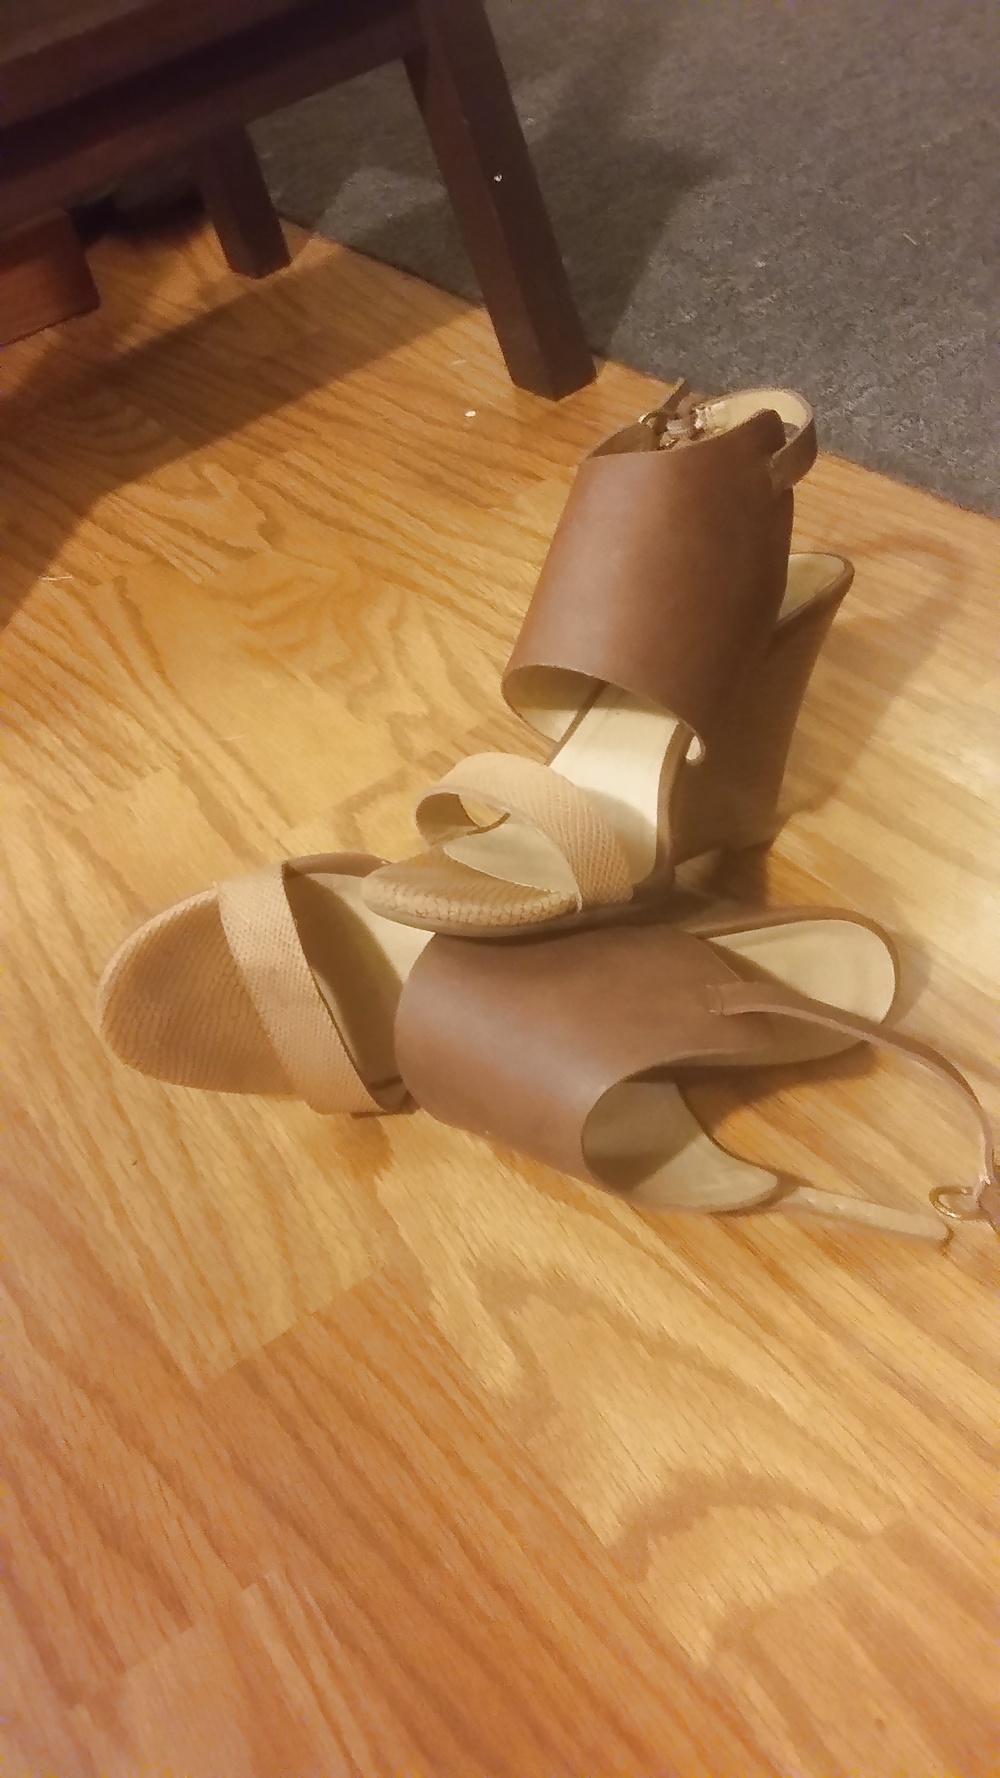 Cum_on_Shoes-Left_Her_Sexy_Little_Wedge_Heels_at_my_house (4/28)